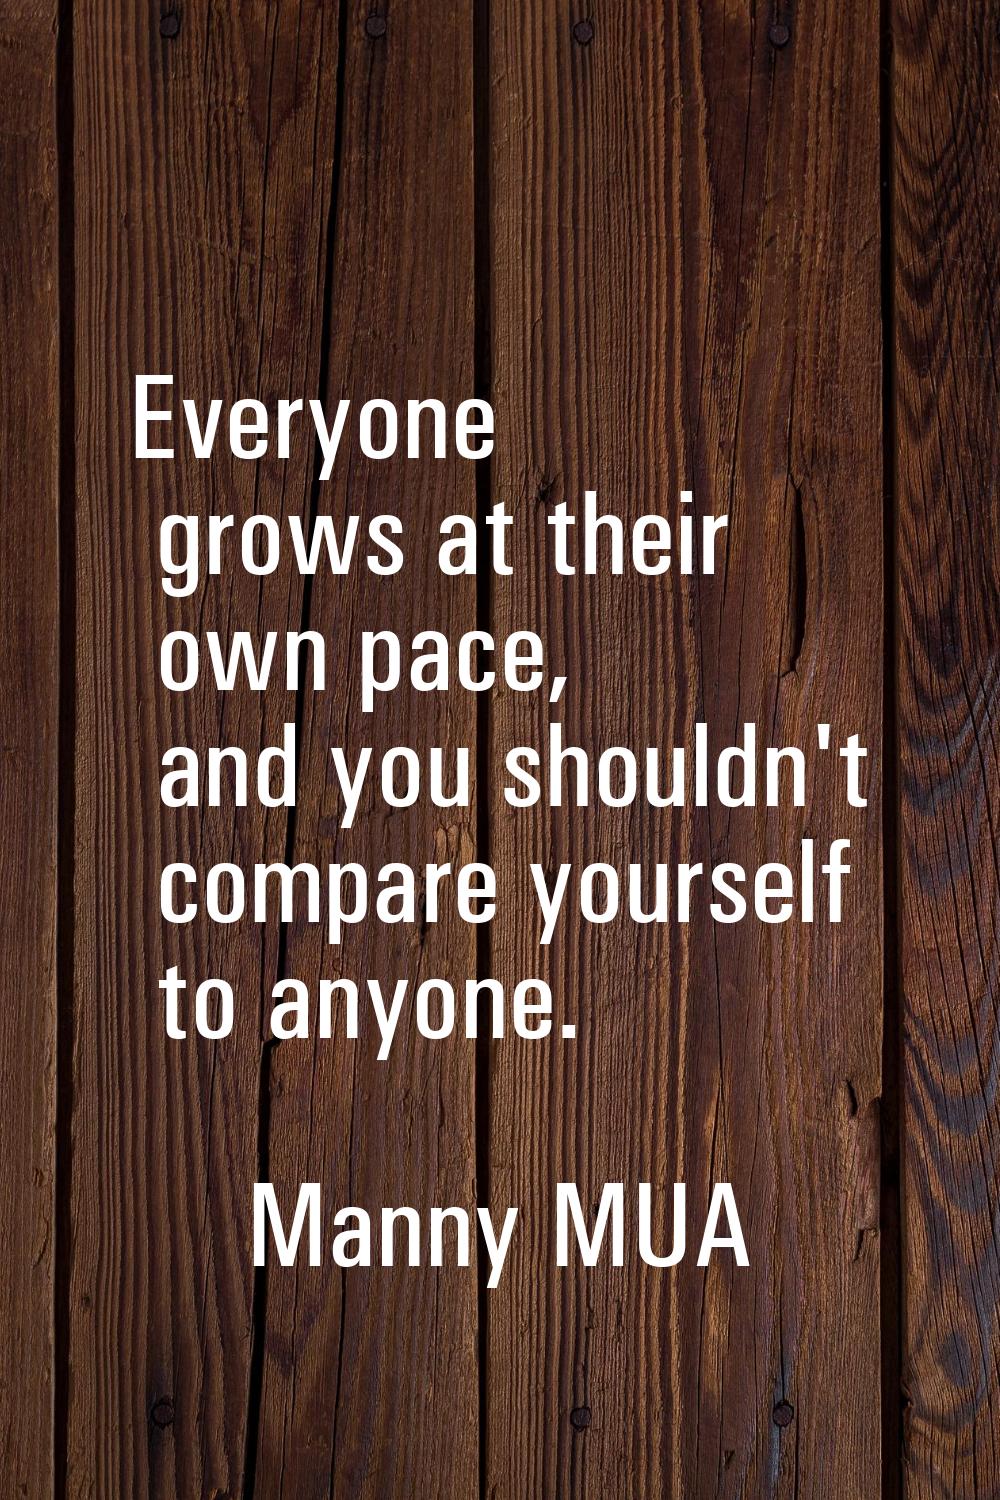 Everyone grows at their own pace, and you shouldn't compare yourself to anyone.